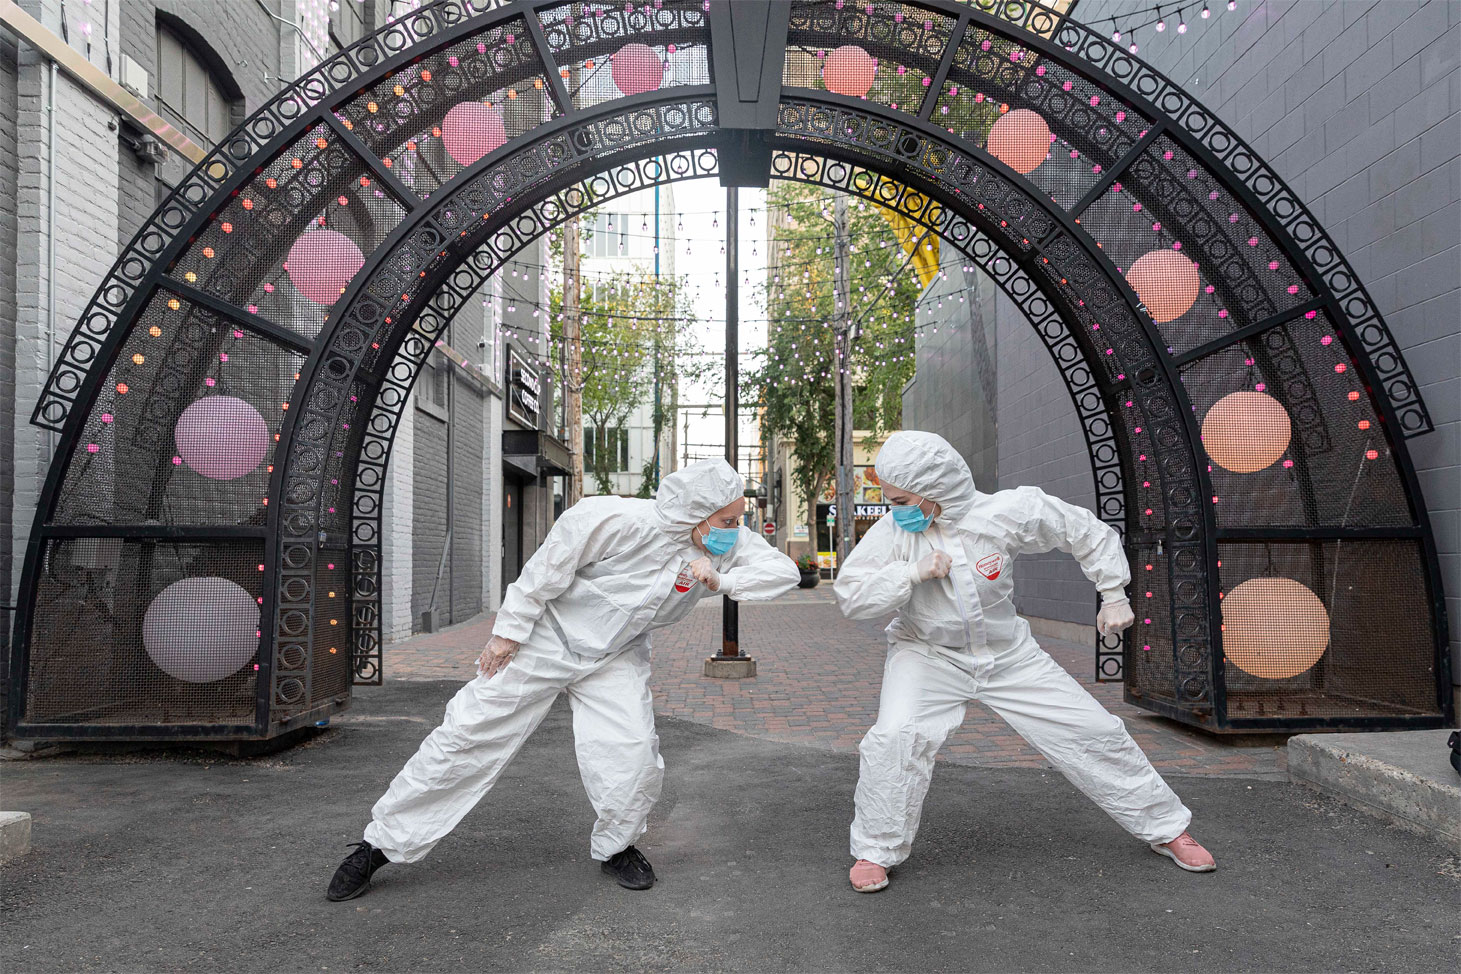 Two dancers in hazmat suits and masks face each other under an outdoor arch